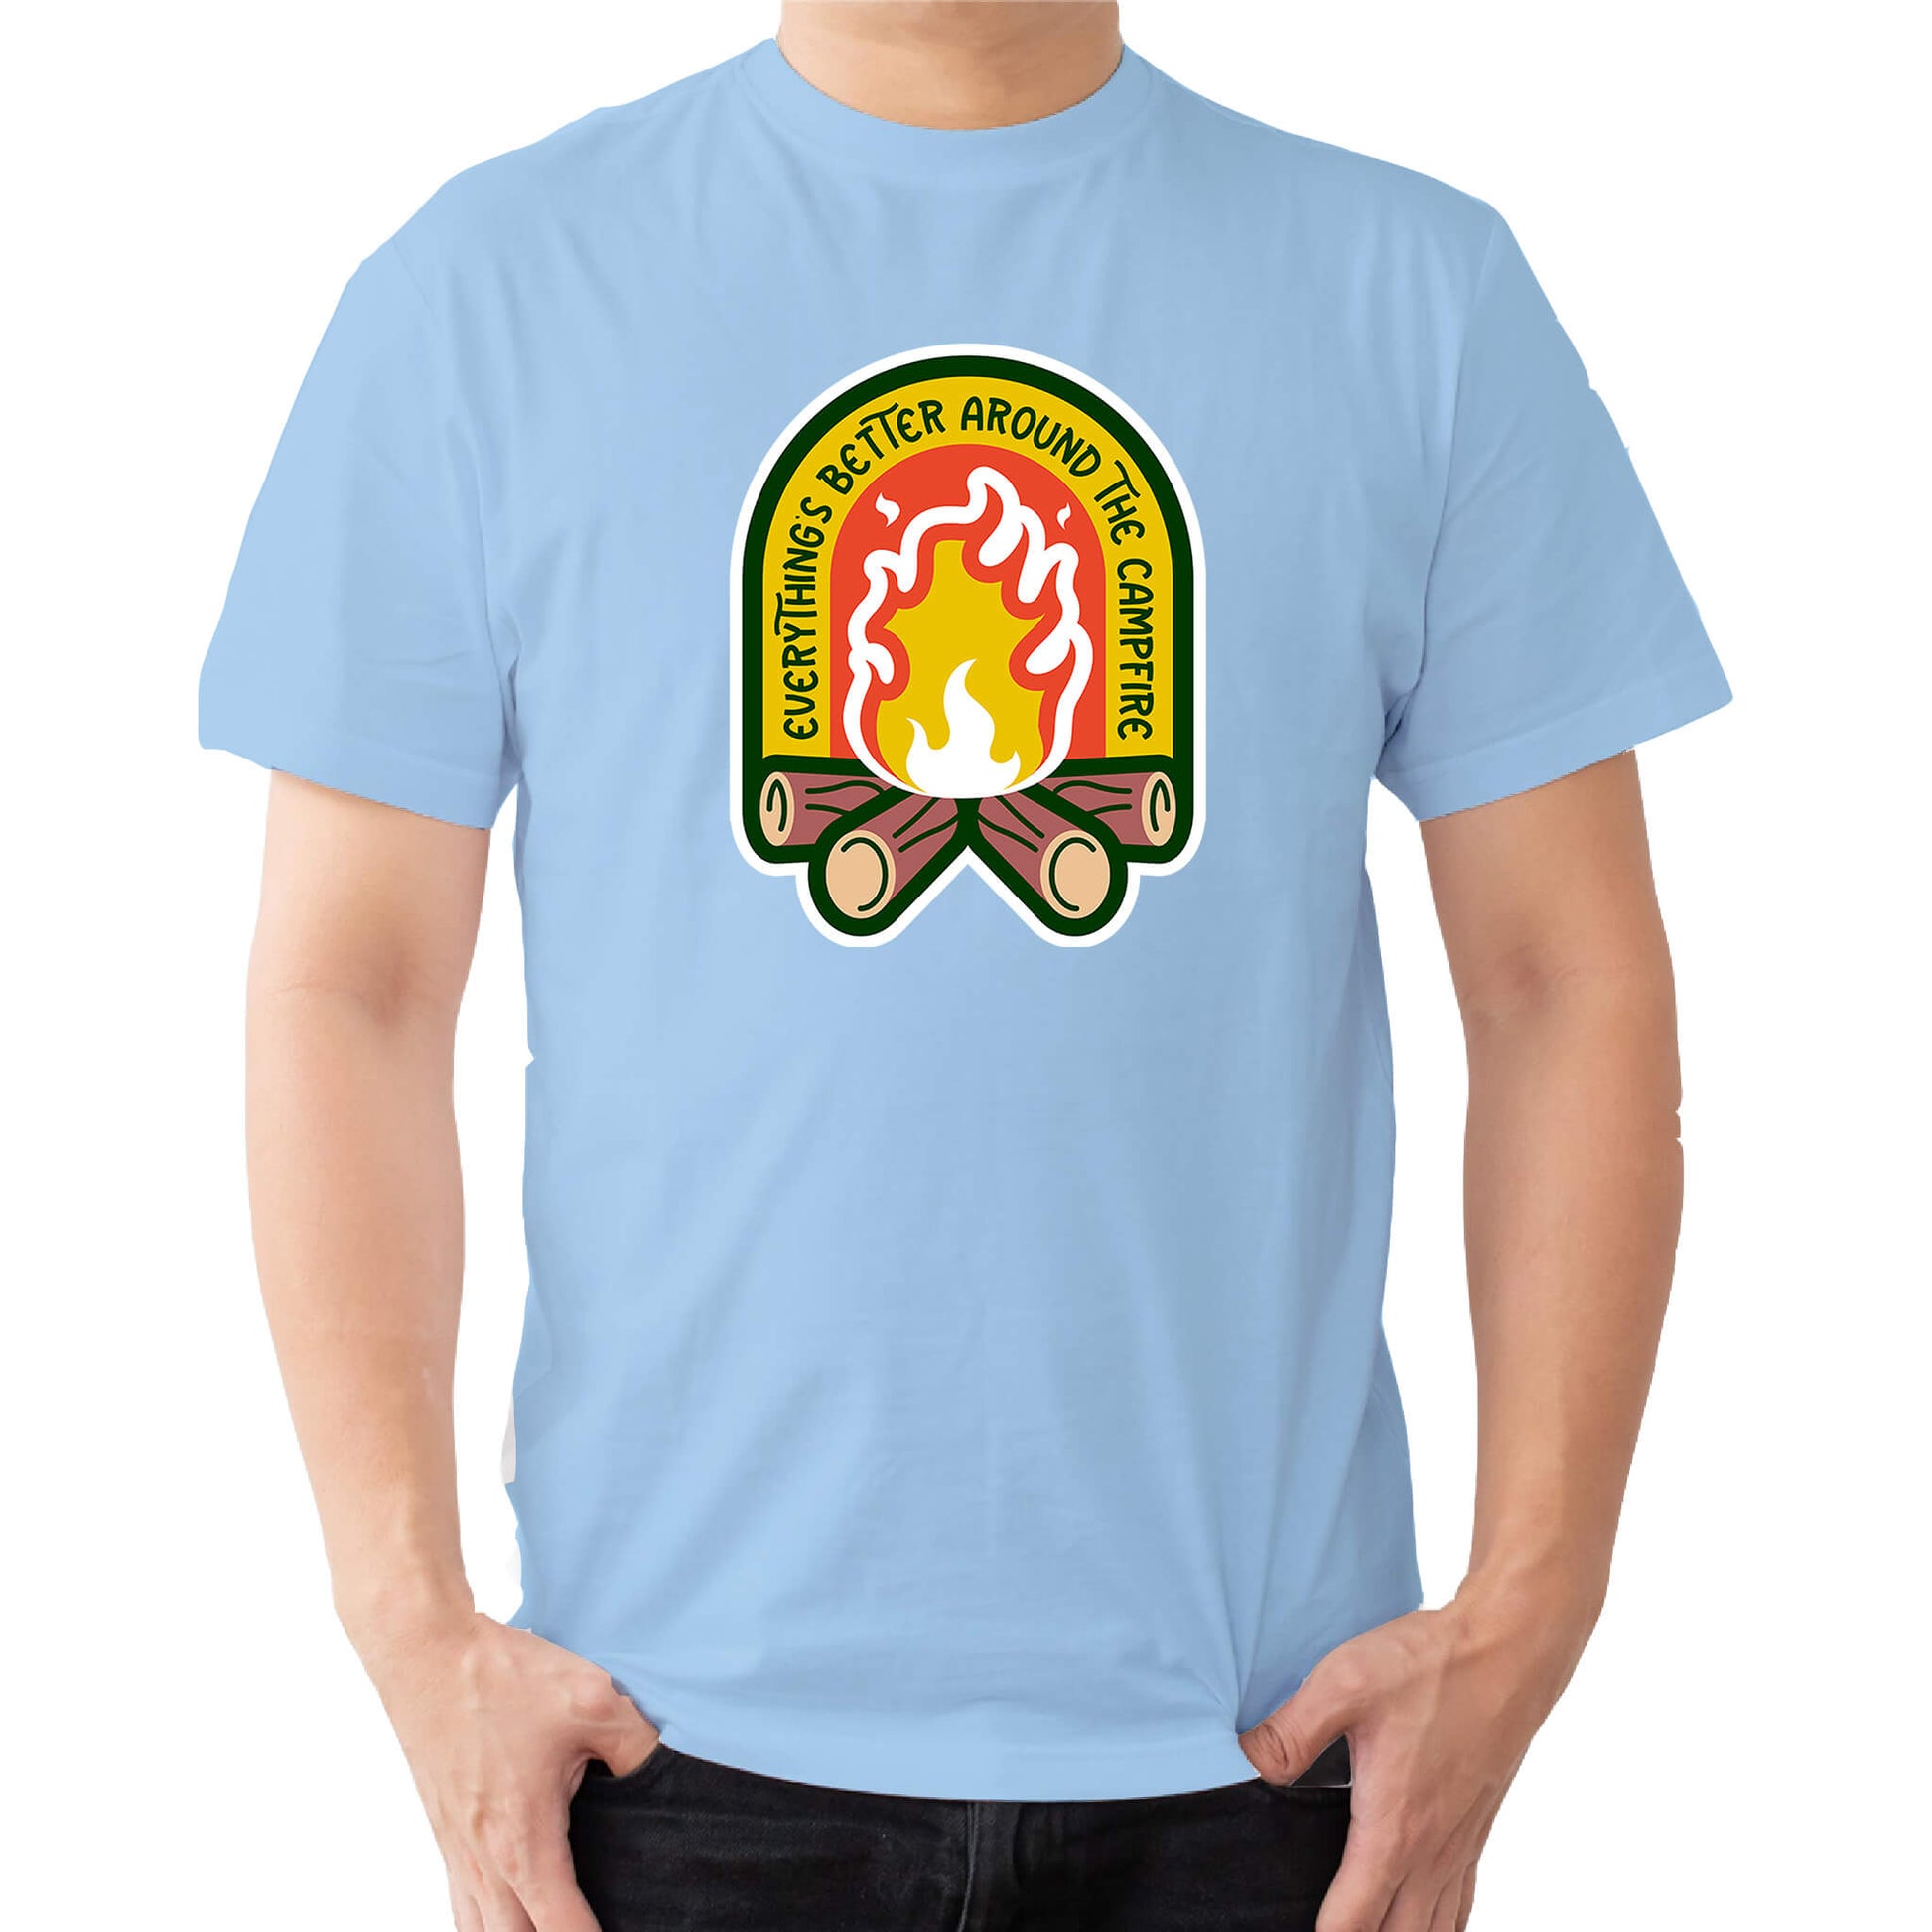 "Blue Cozy tee featuring a campfire image, perfect for outdoor enthusiasts. Text says: 'Everything is better around the campfire.' Embrace the warmth and camaraderie!"